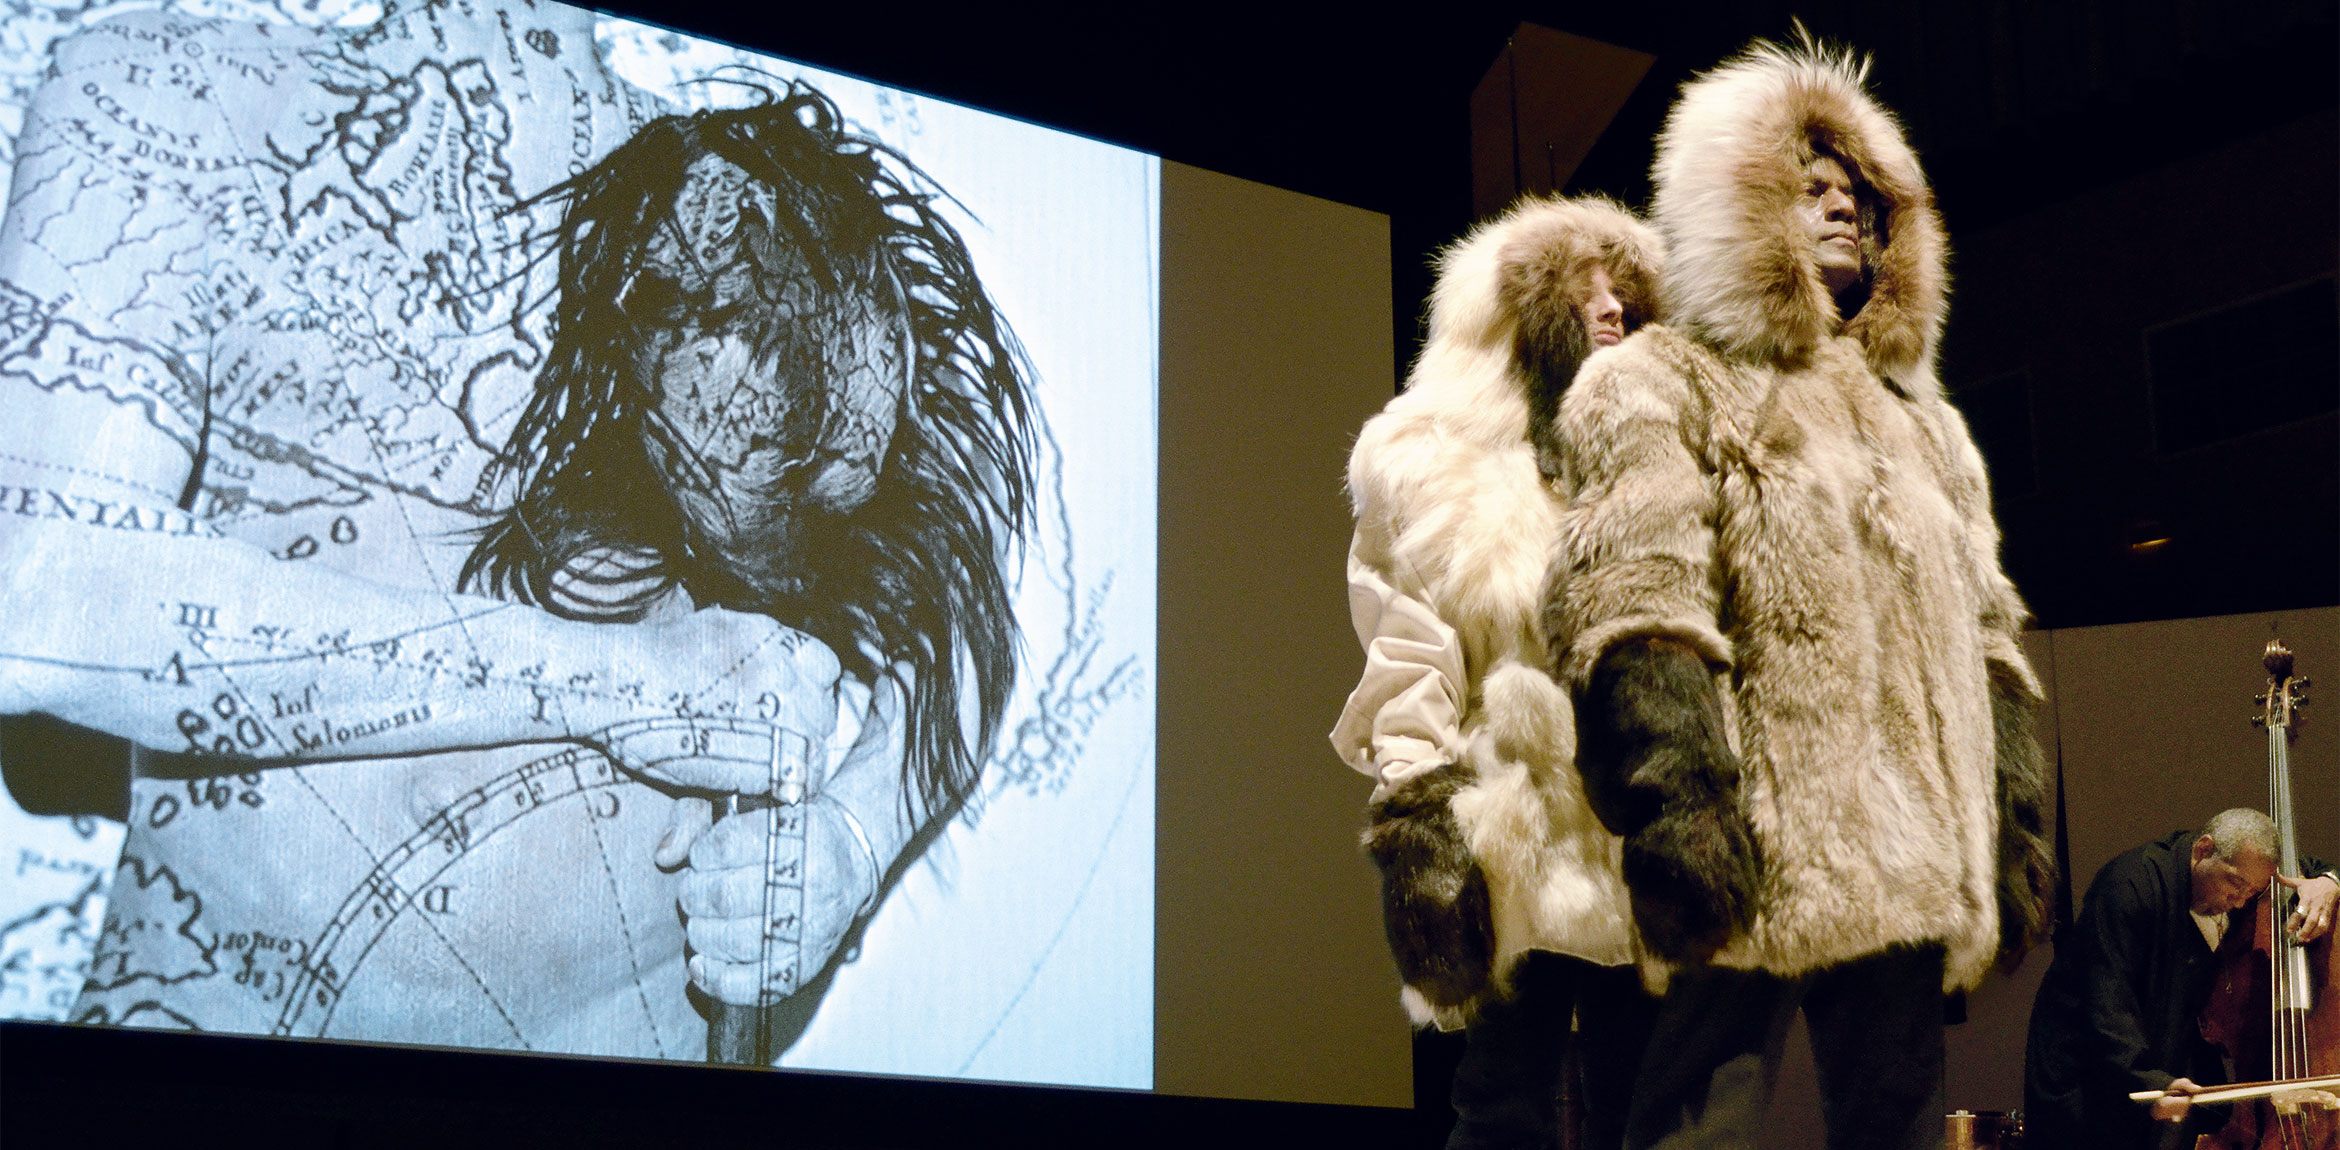 Two Lone Wolf Recital Corps members wear Alaskan fur parkas and stand on a stage in front of an image projected on a screen behind them. A cellist plays to the right.